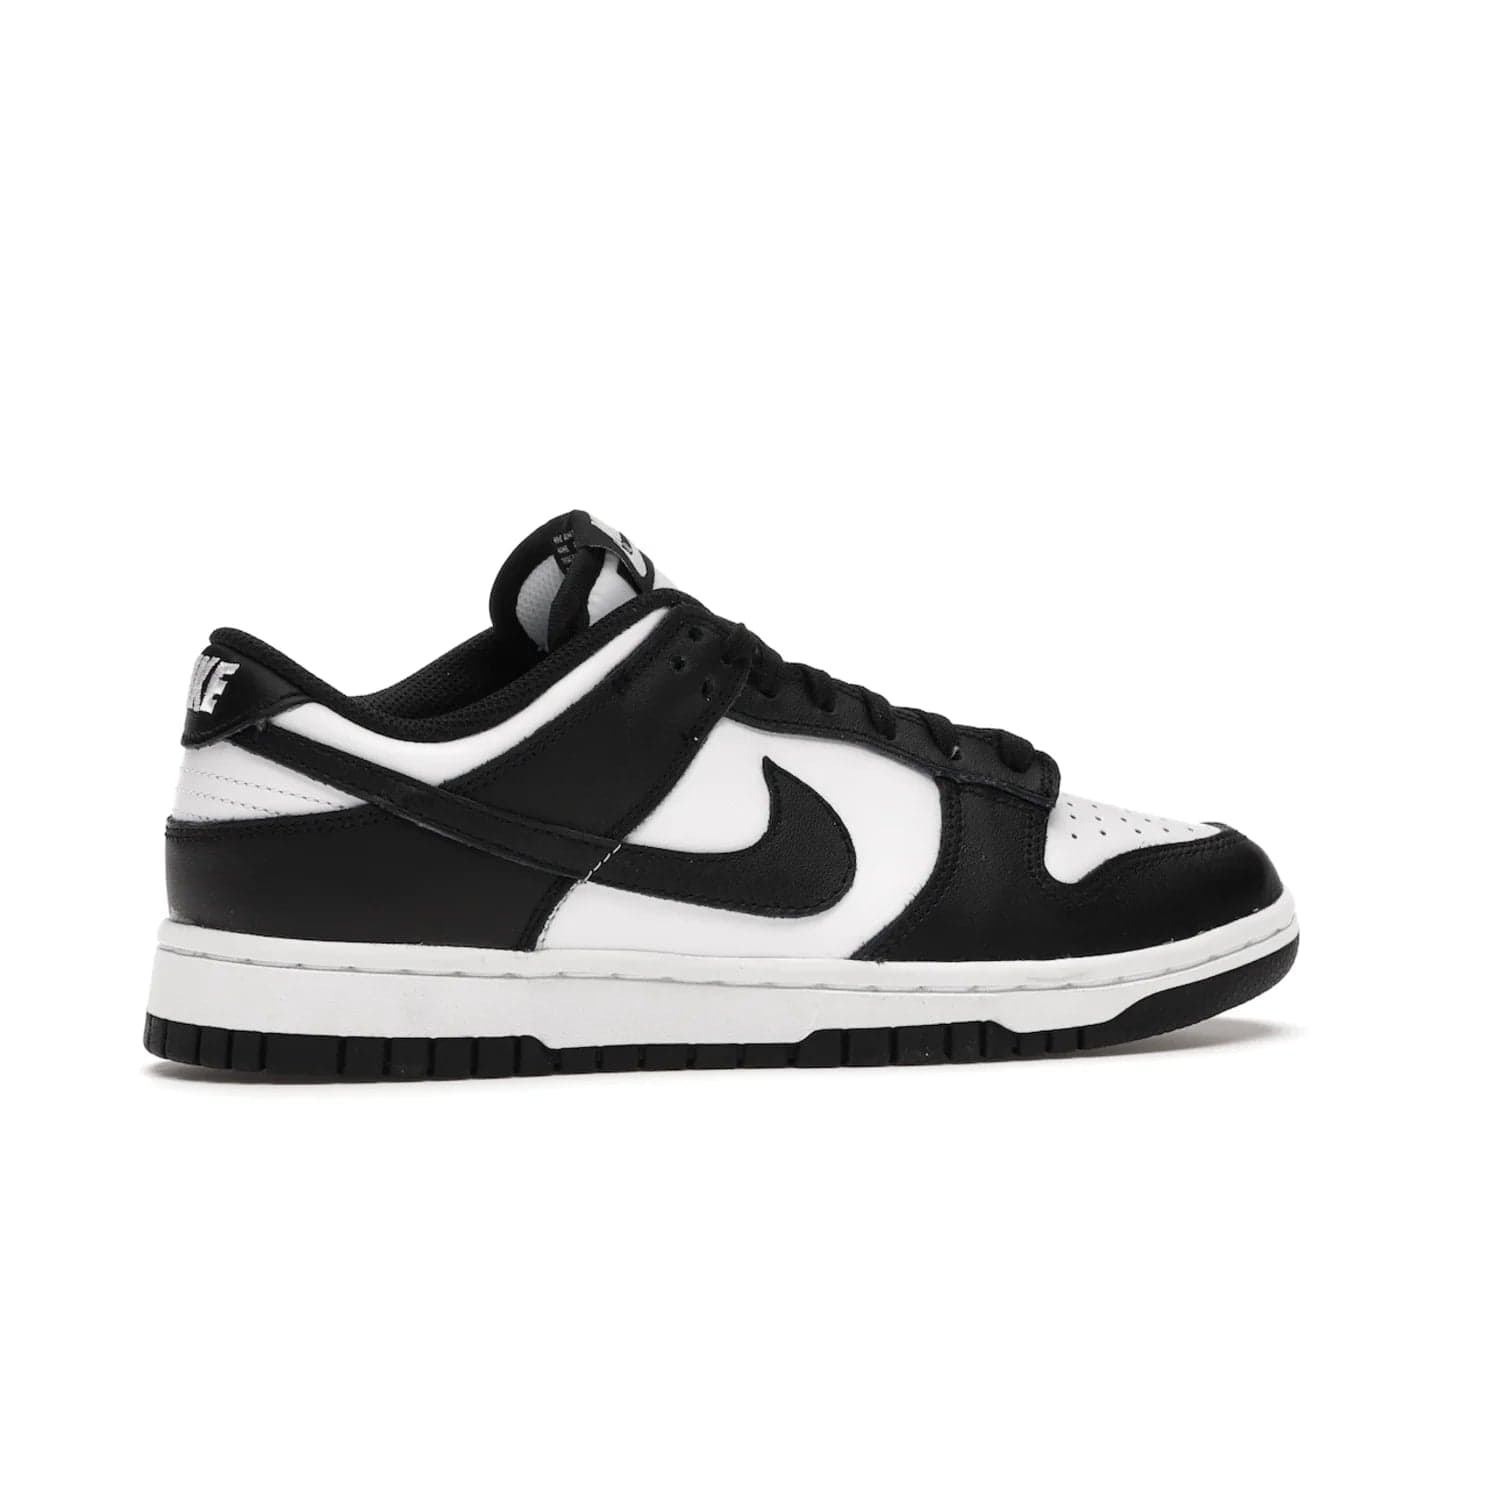 Nike Dunk Low Retro White Black Panda (2021) (Women's) - Image 35 - Only at www.BallersClubKickz.com - Say hello to the new Nike Dunk Low Retro White Black Panda (2021) (Women's)! White & black leather upper with Nike Swoosh logo. Get your pair for $100 in March 2021! Shop now!